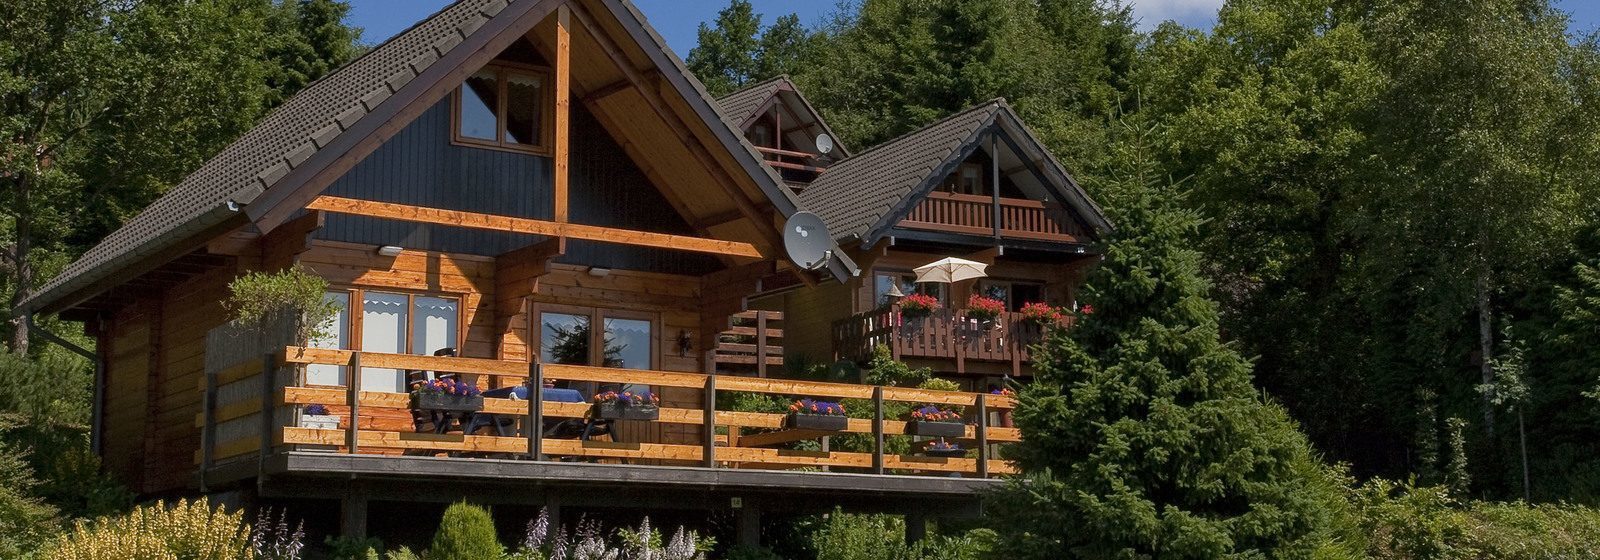 Rent a chalet in the Ardennes | Petite Suisse